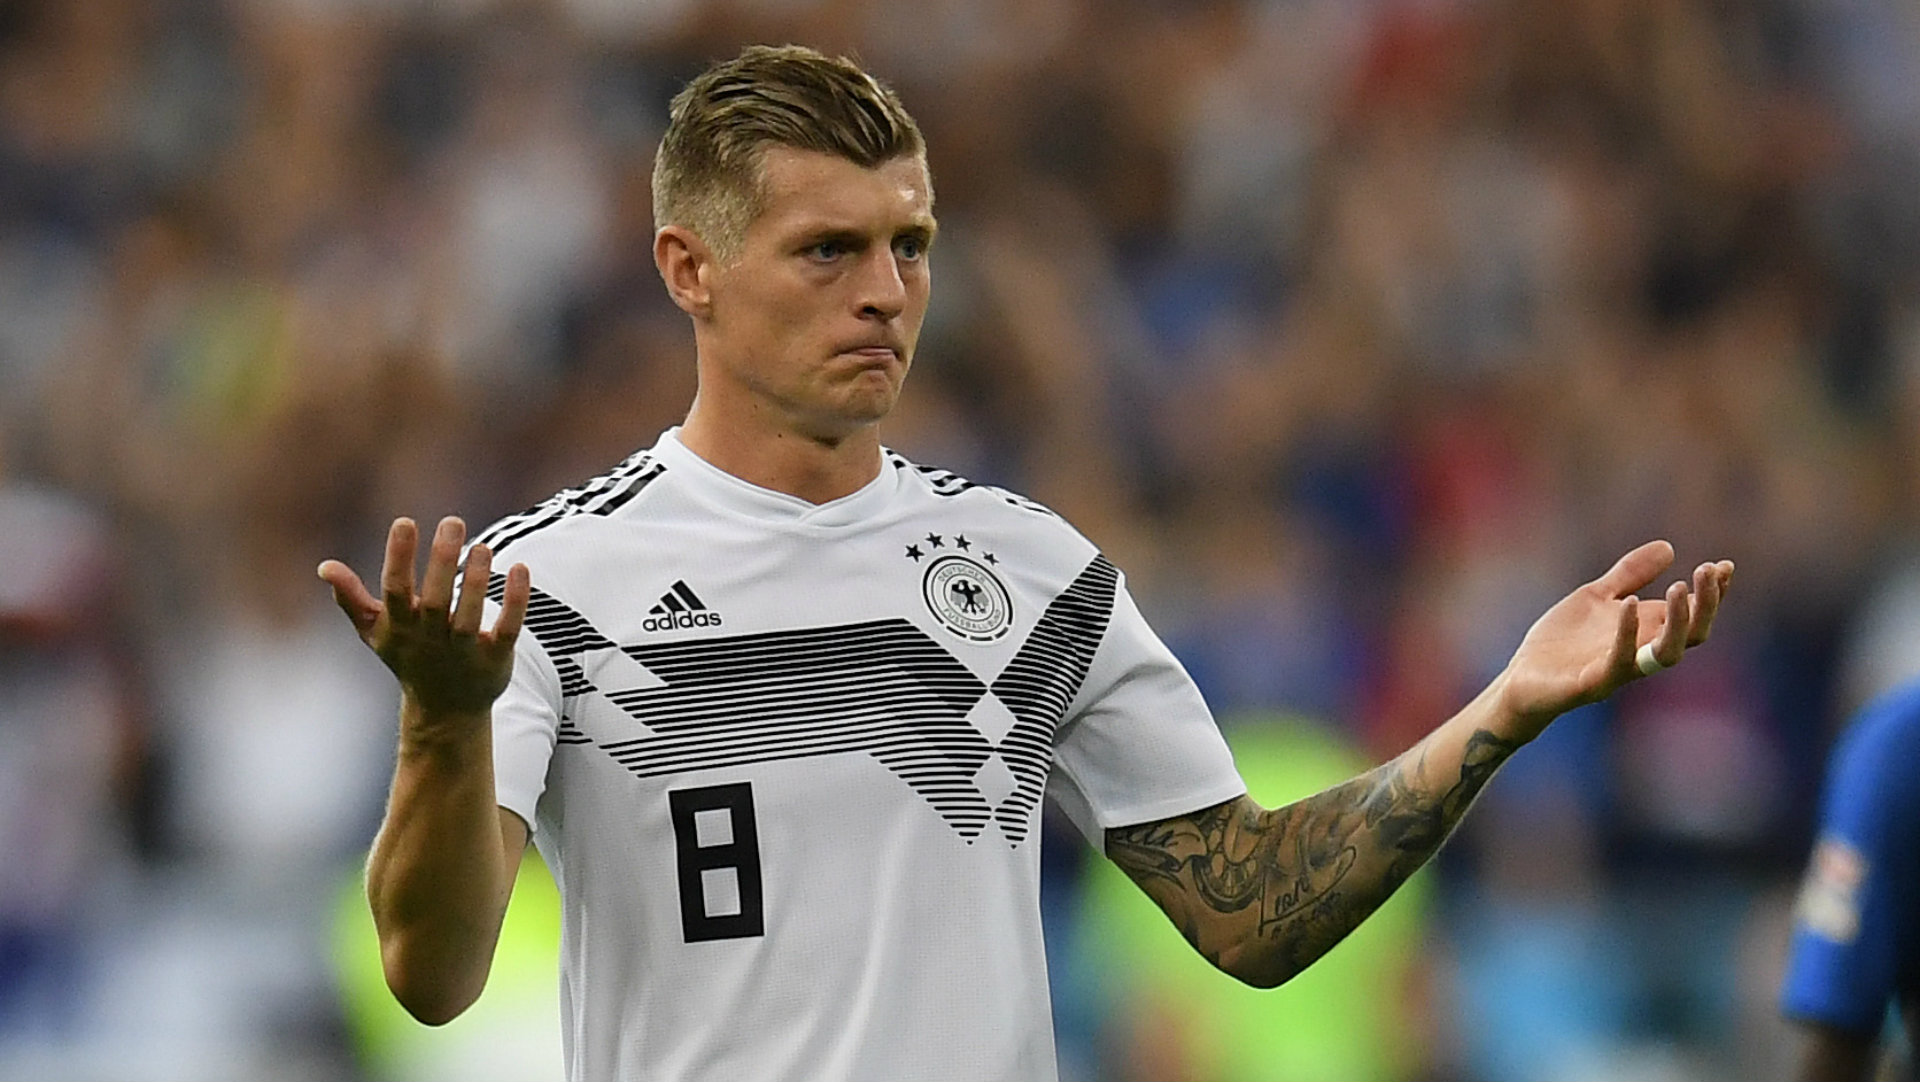 Toni Kroos: “After the end of Euro 2020, it will be a good moment to think about whether I will retire from international football.” - Bóng Đá